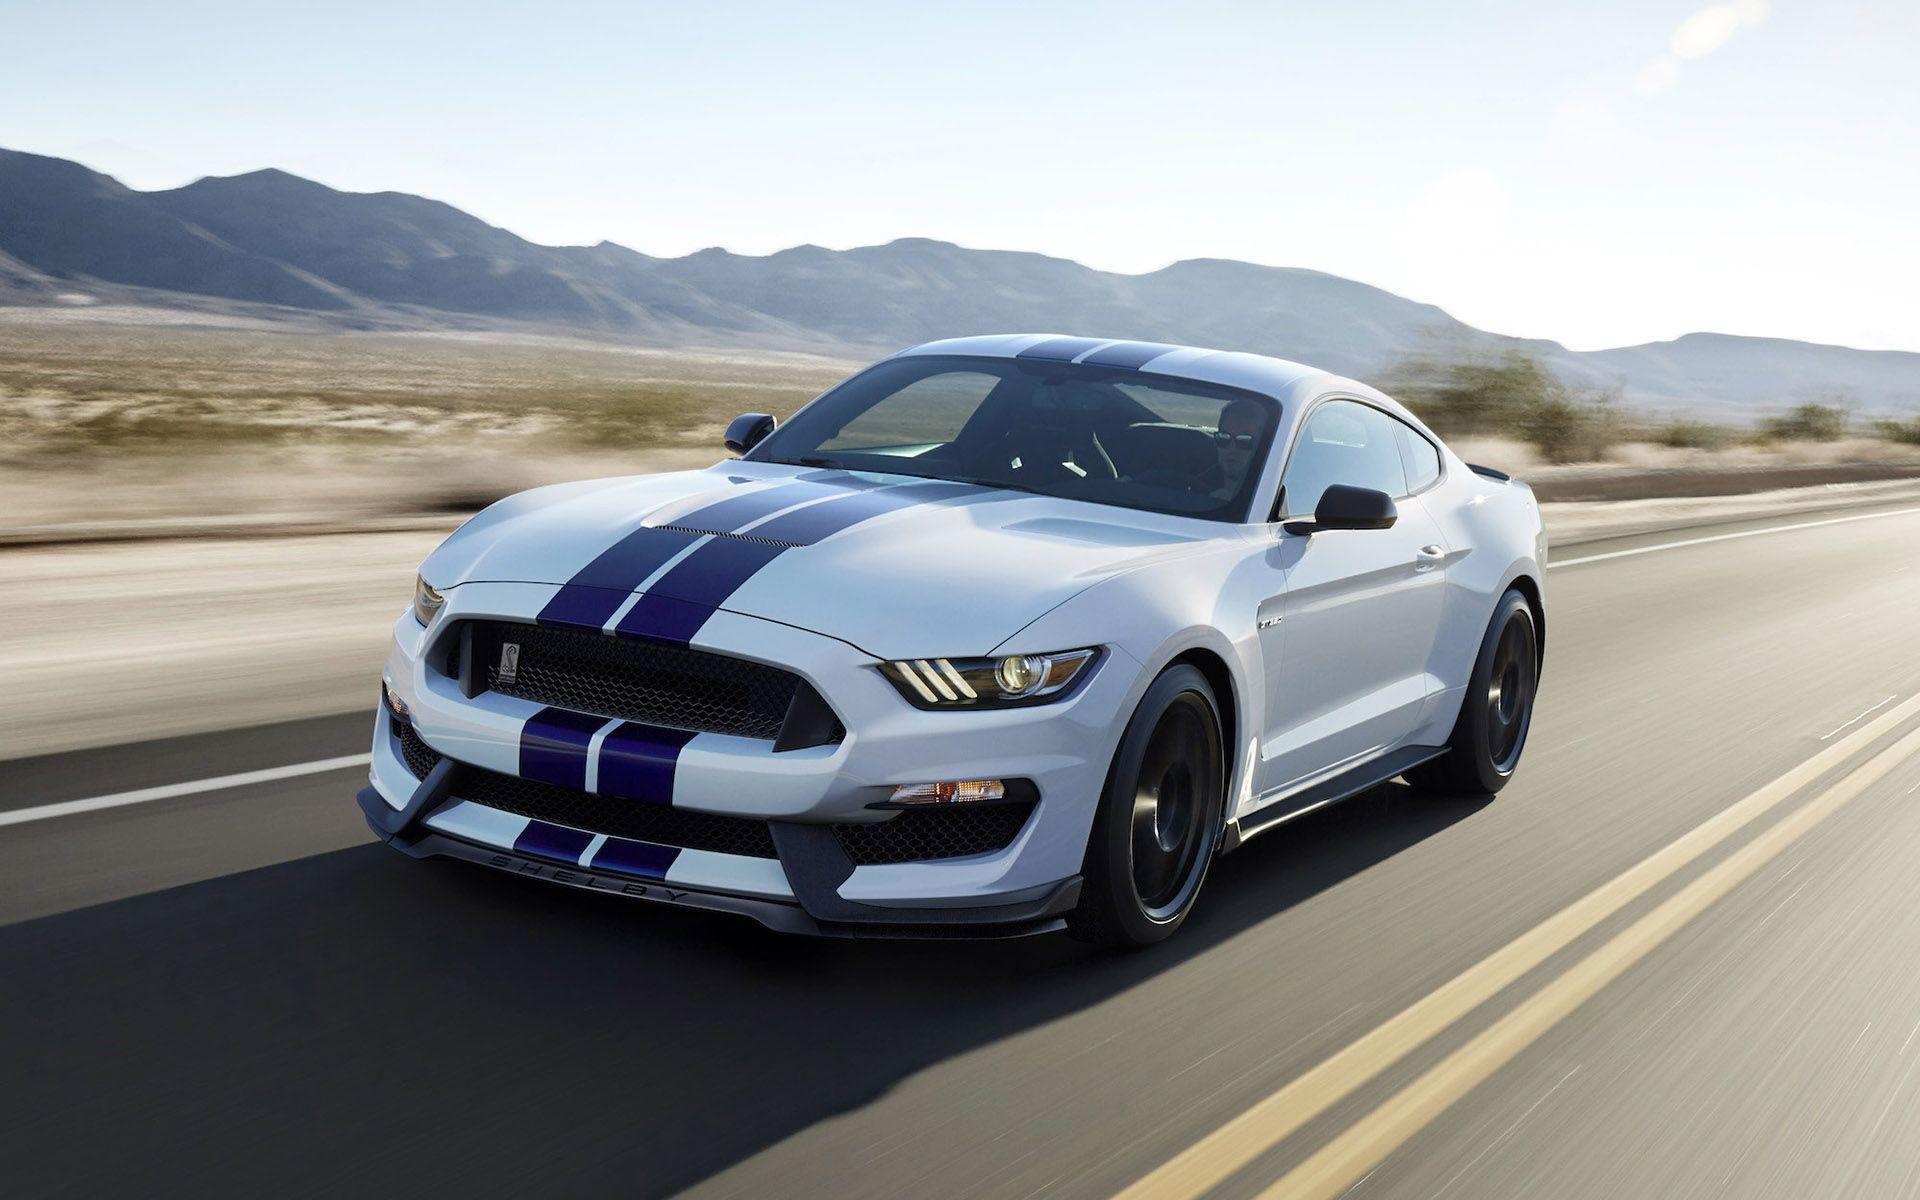 Shelby Mustang Gt 350 Wallpapers